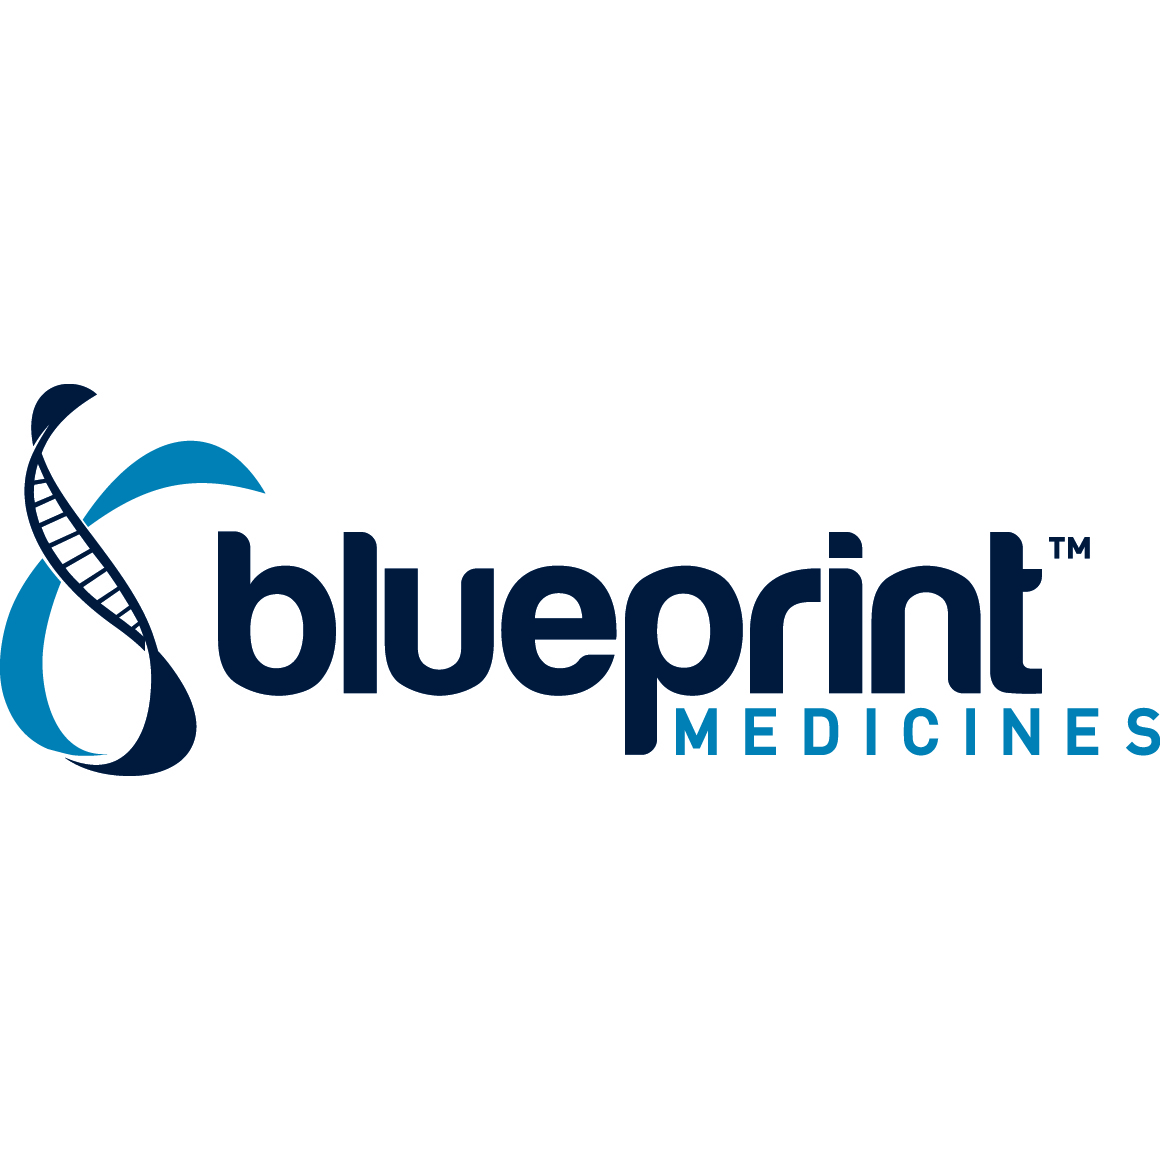 Blueprint Medicines' Ayvakit (avapritinib) Receives FDA's Approval to Treat Patients with Unresectable or Metastatic PDGFRA Exon 18 Mutant Gastrointestinal Stromal Tumor